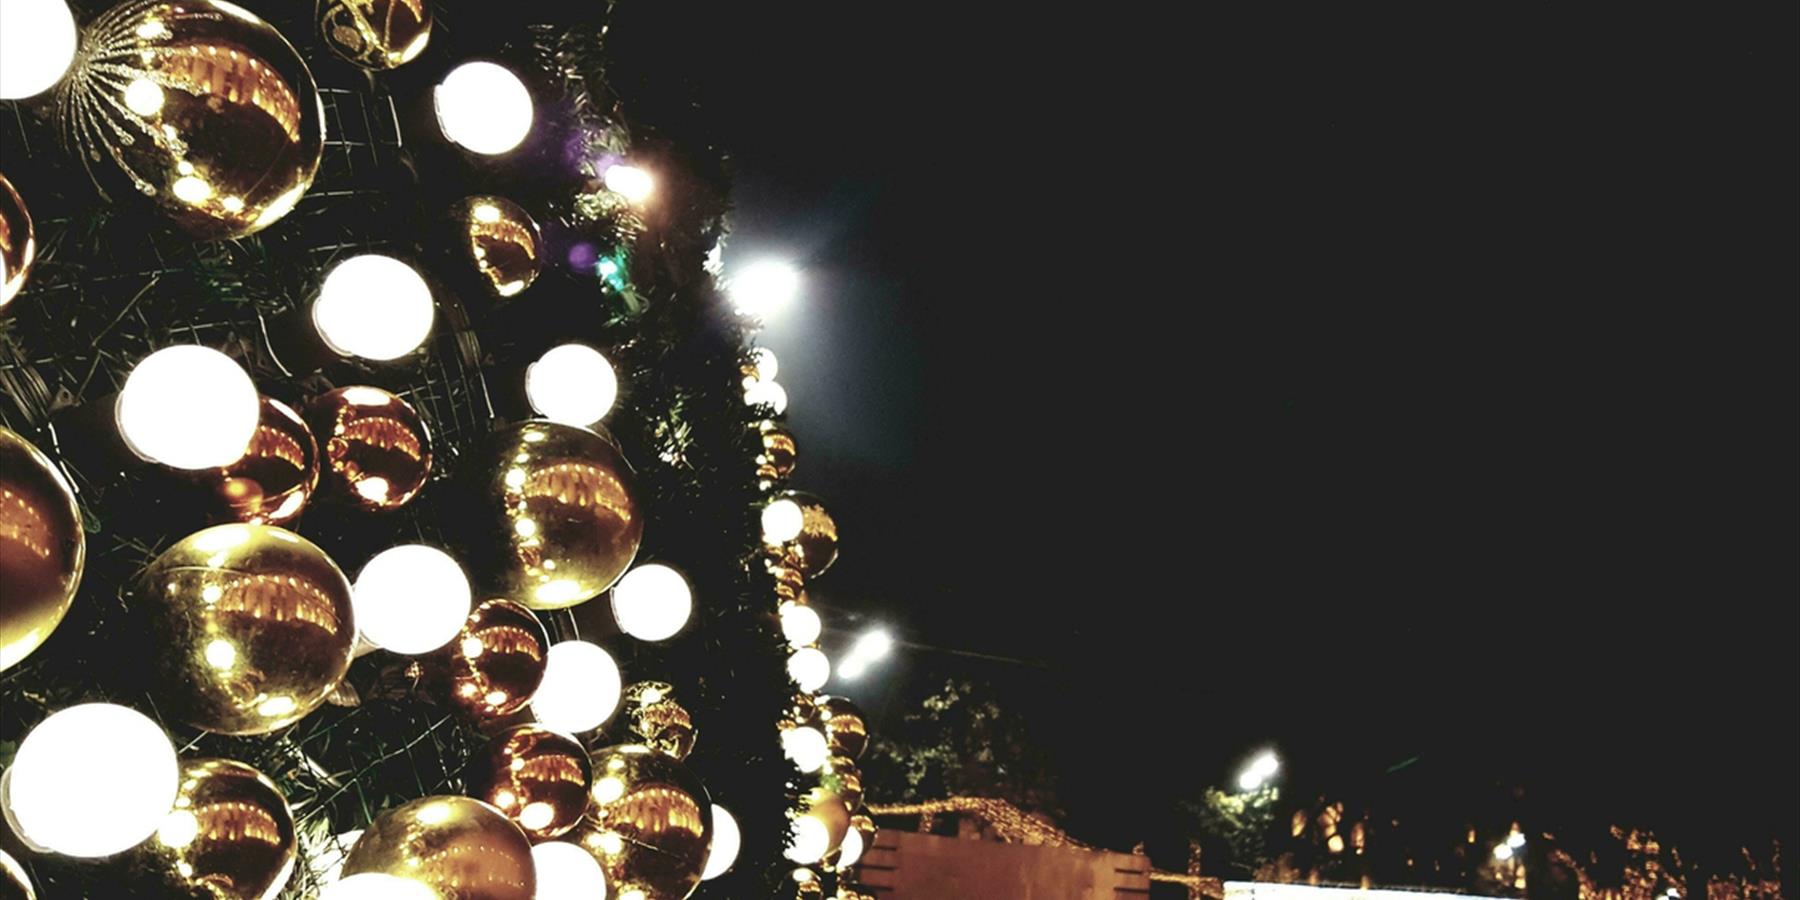 Gold and silver baubles displayed on the wall of an outdoor display